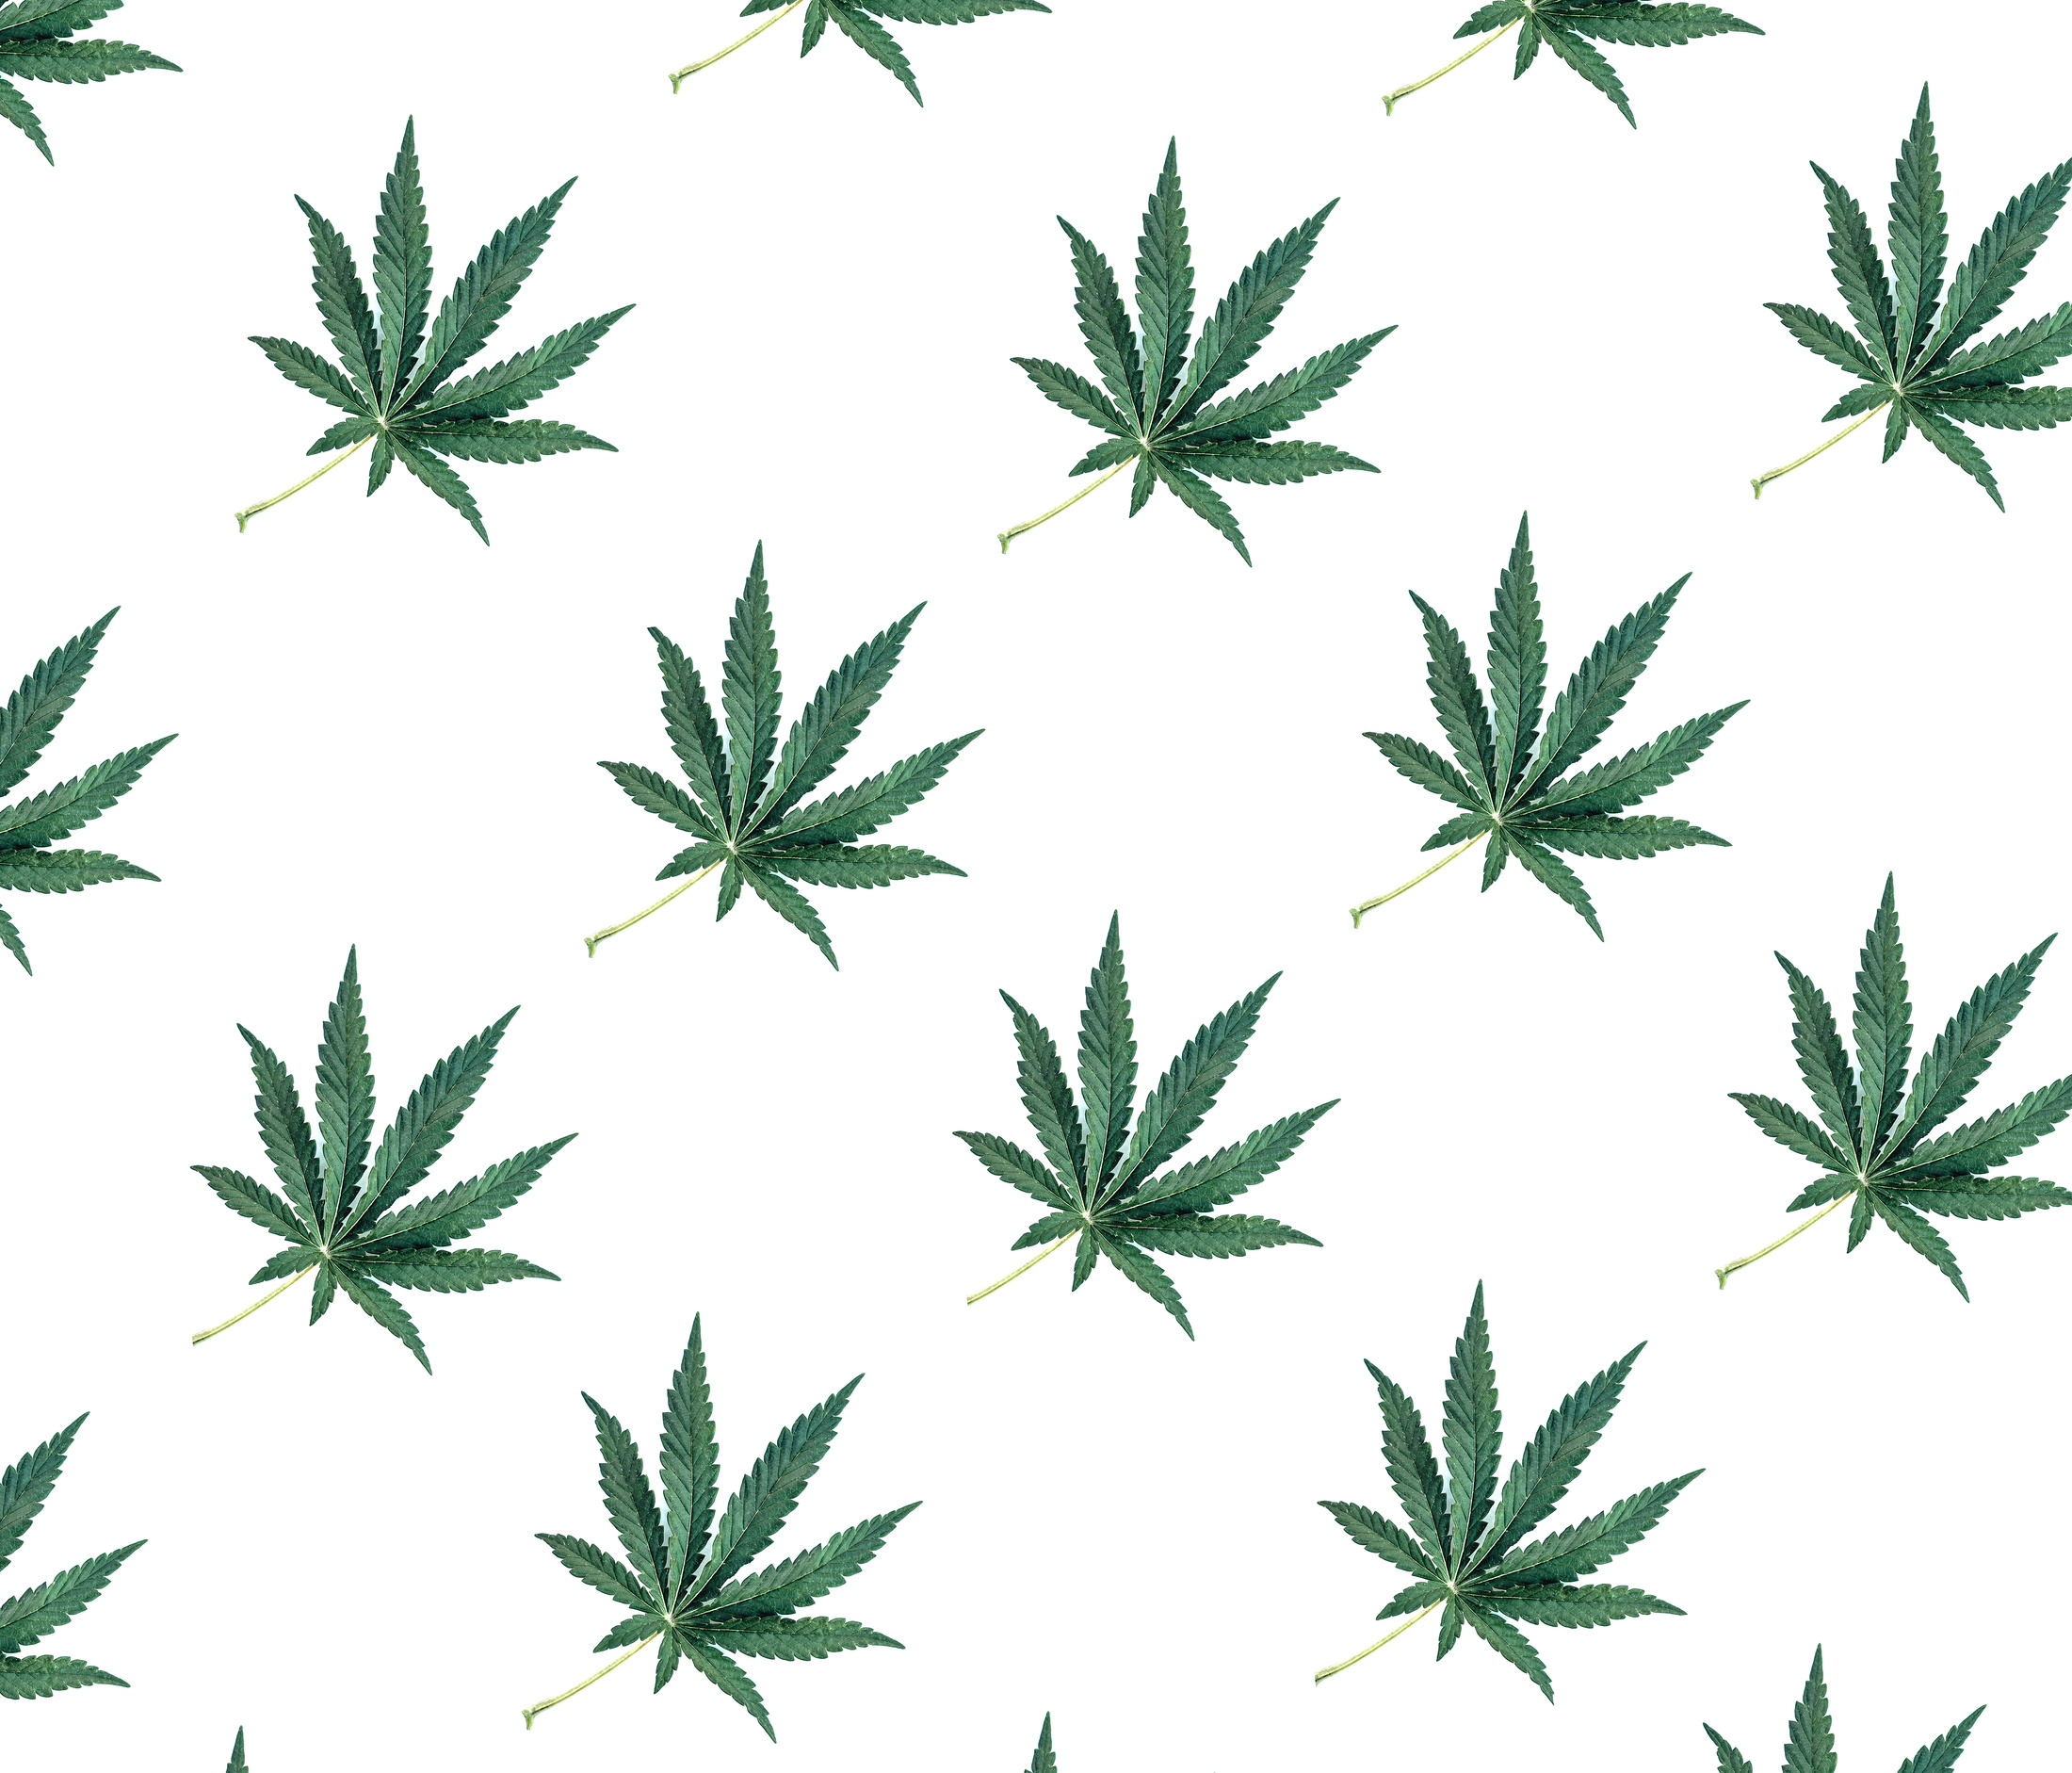 Pattern of Green Cannabis Leaves on a White Isolated Background